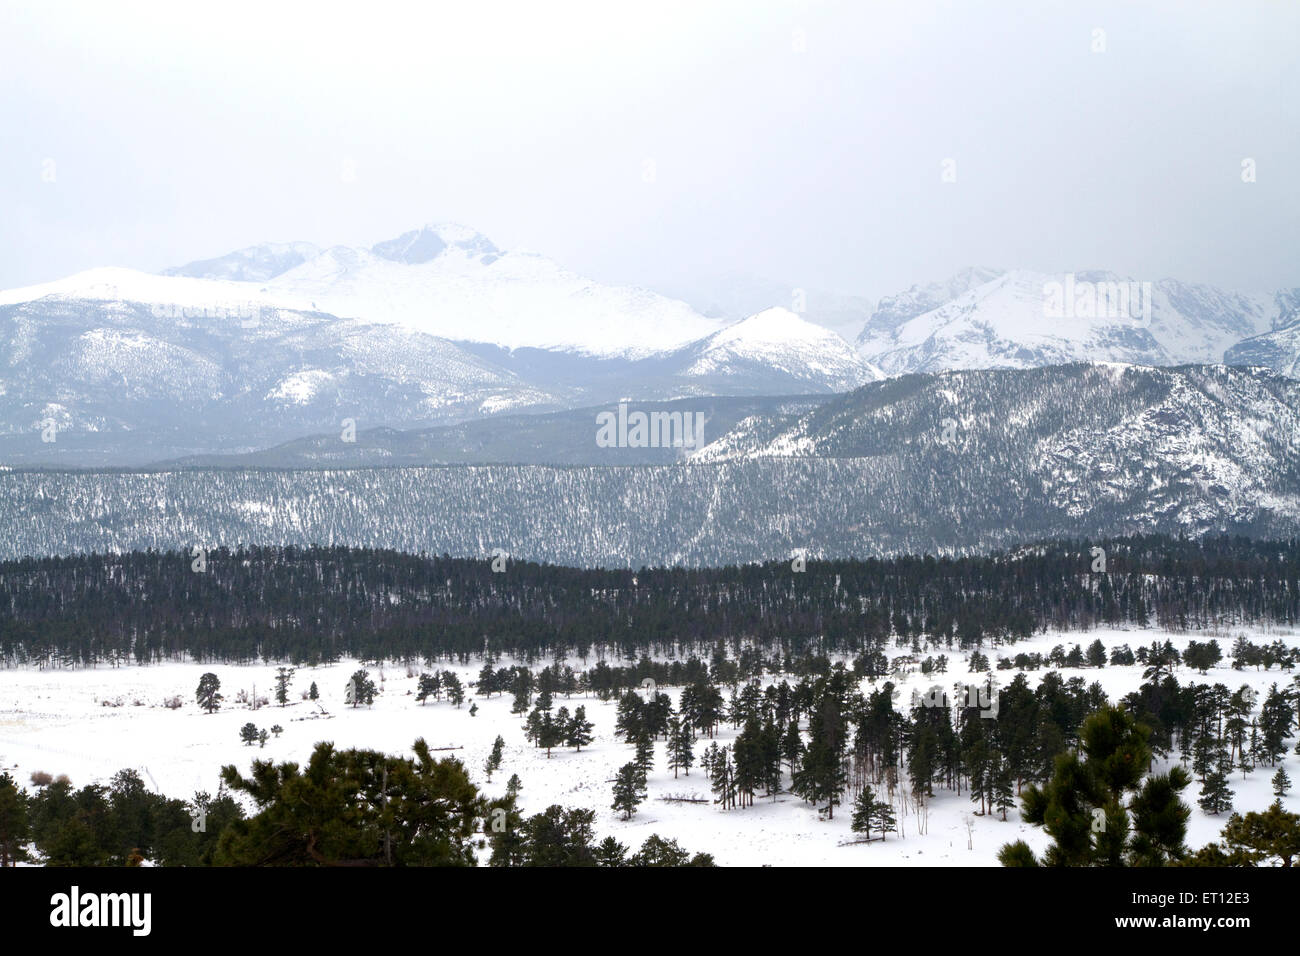 Snow storm advancing over the Rocky Mountains in Colorado, USA. Stock Photo